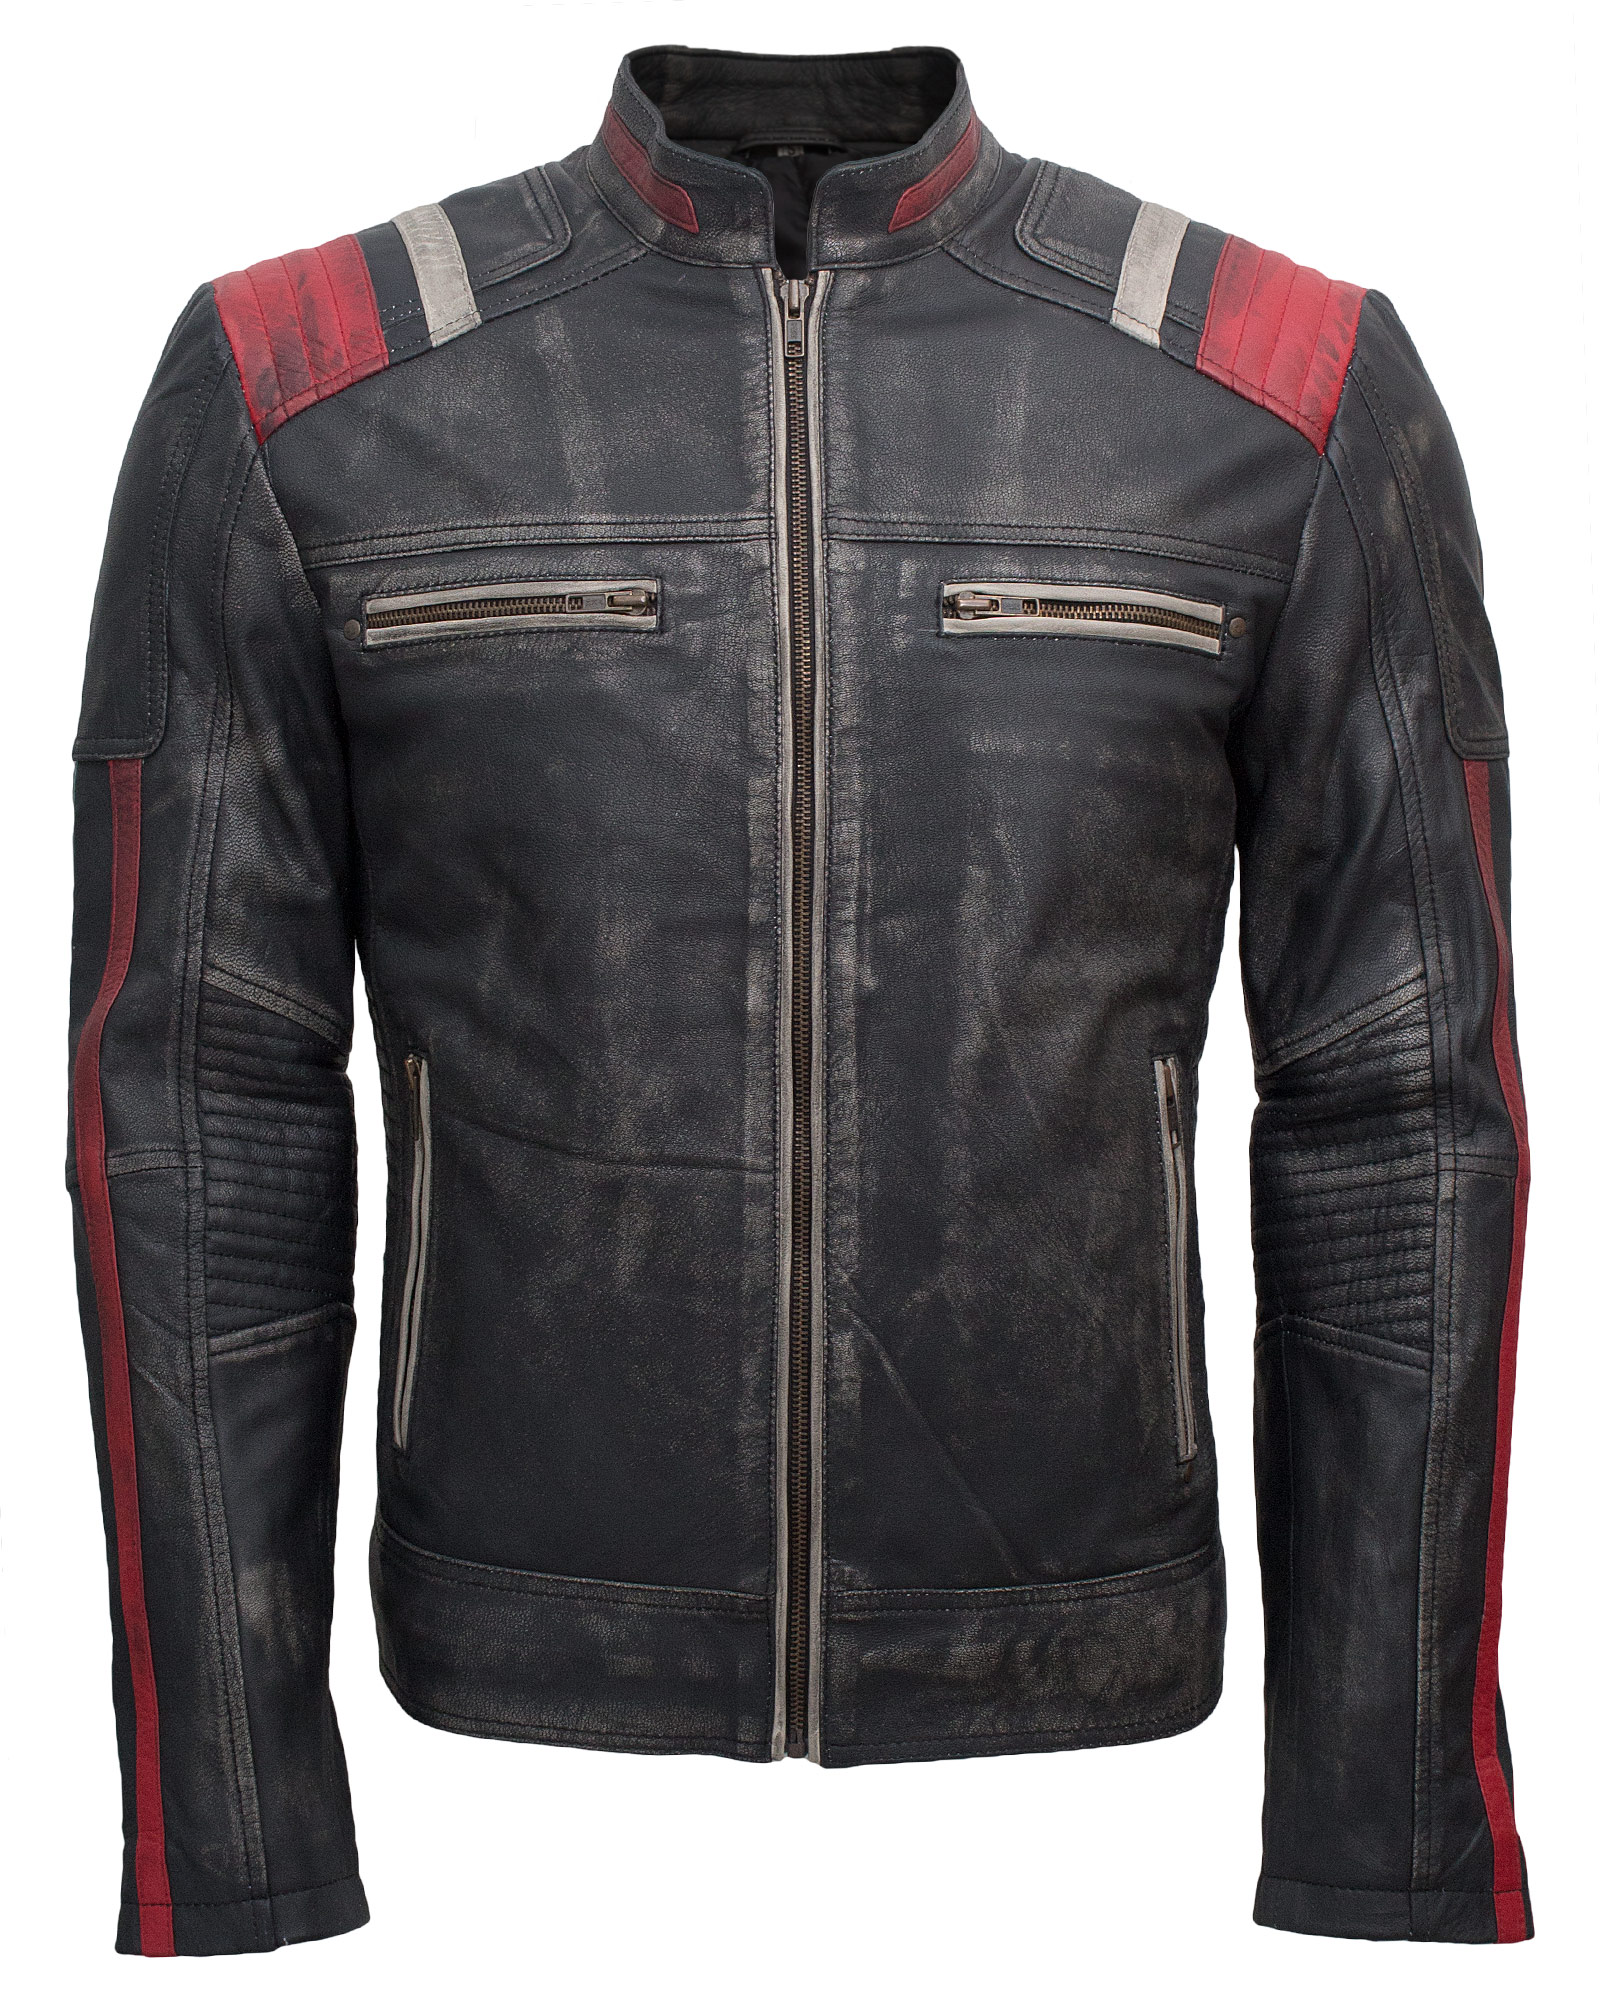 Distressed Leather Jackets Men for Sale | XtremeJackets